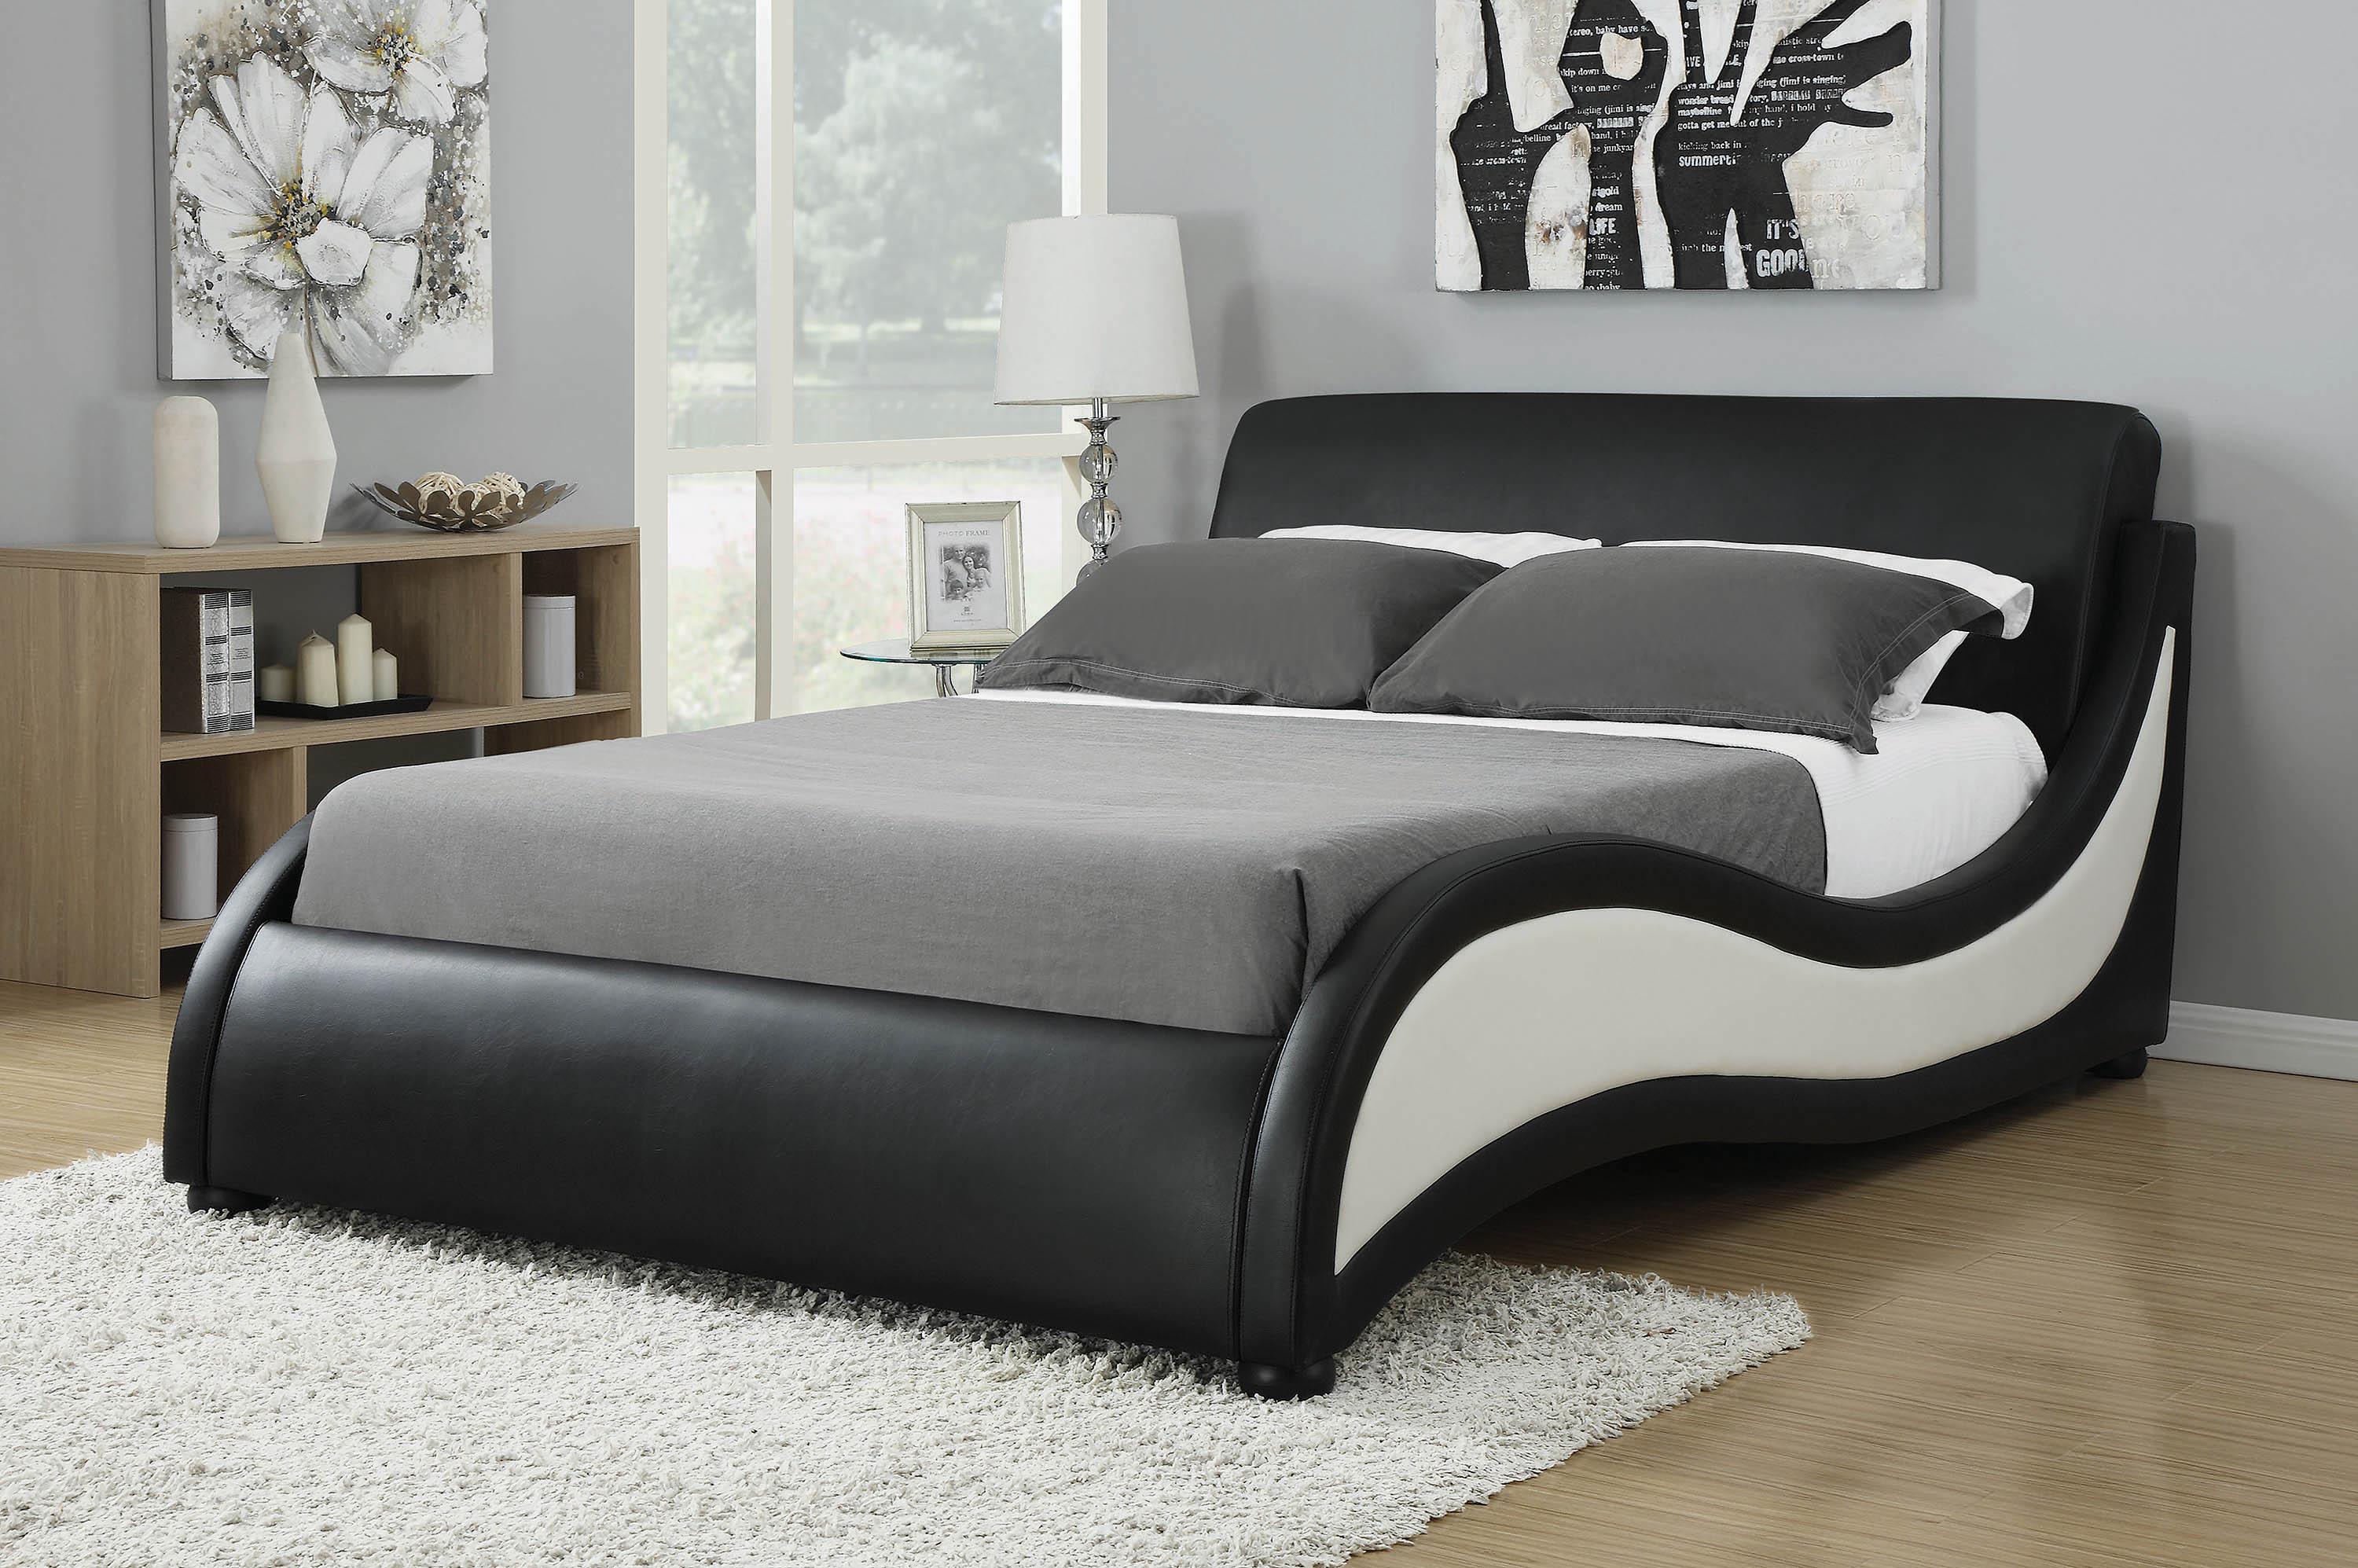 Contemporary Platform Bed Niguel 300170Q in Black Faux Leather